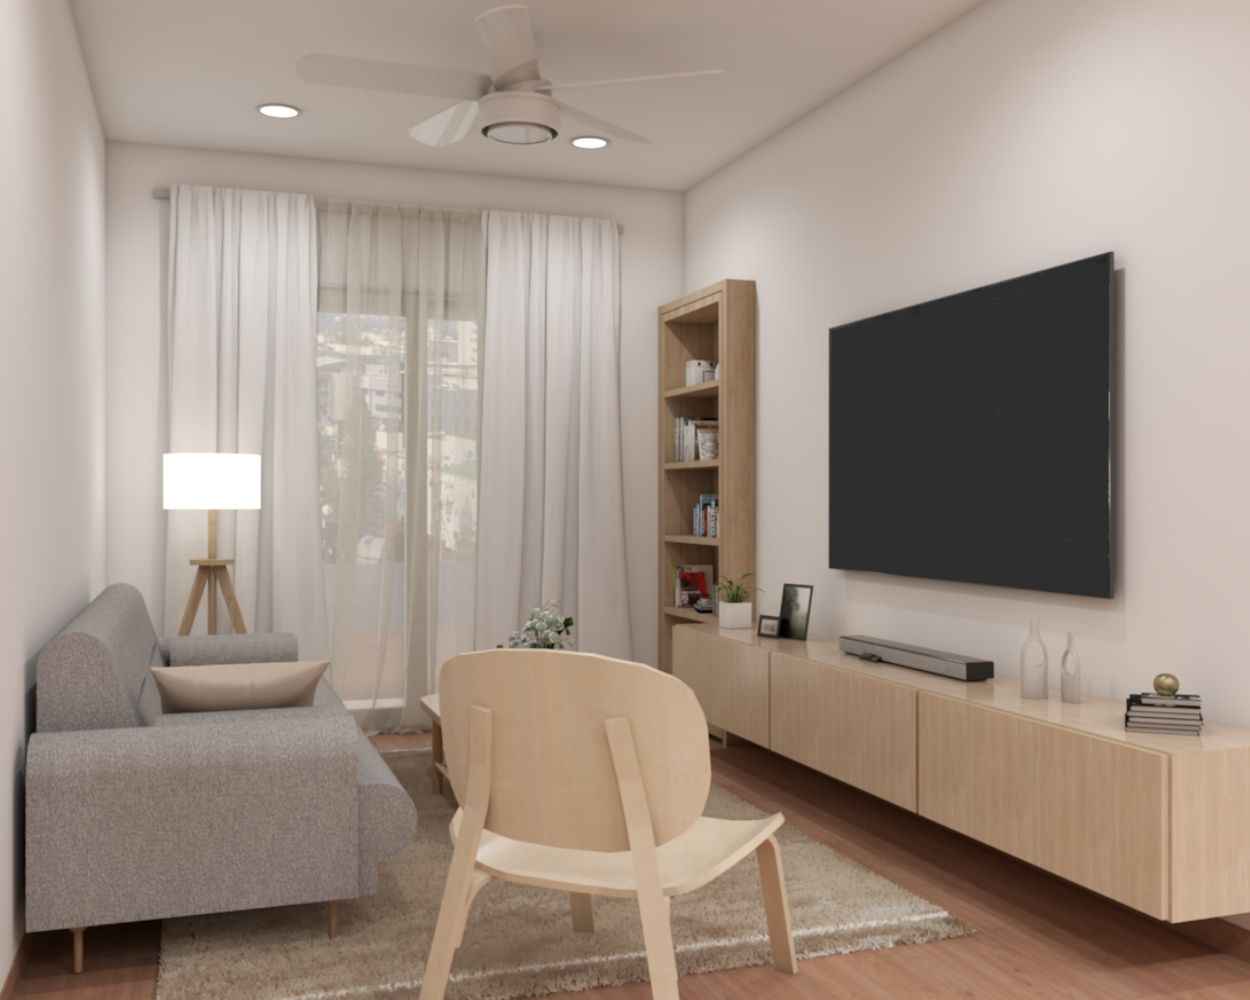 Modern Living Room Design With A Wall-Mounted Wooden TV Unit